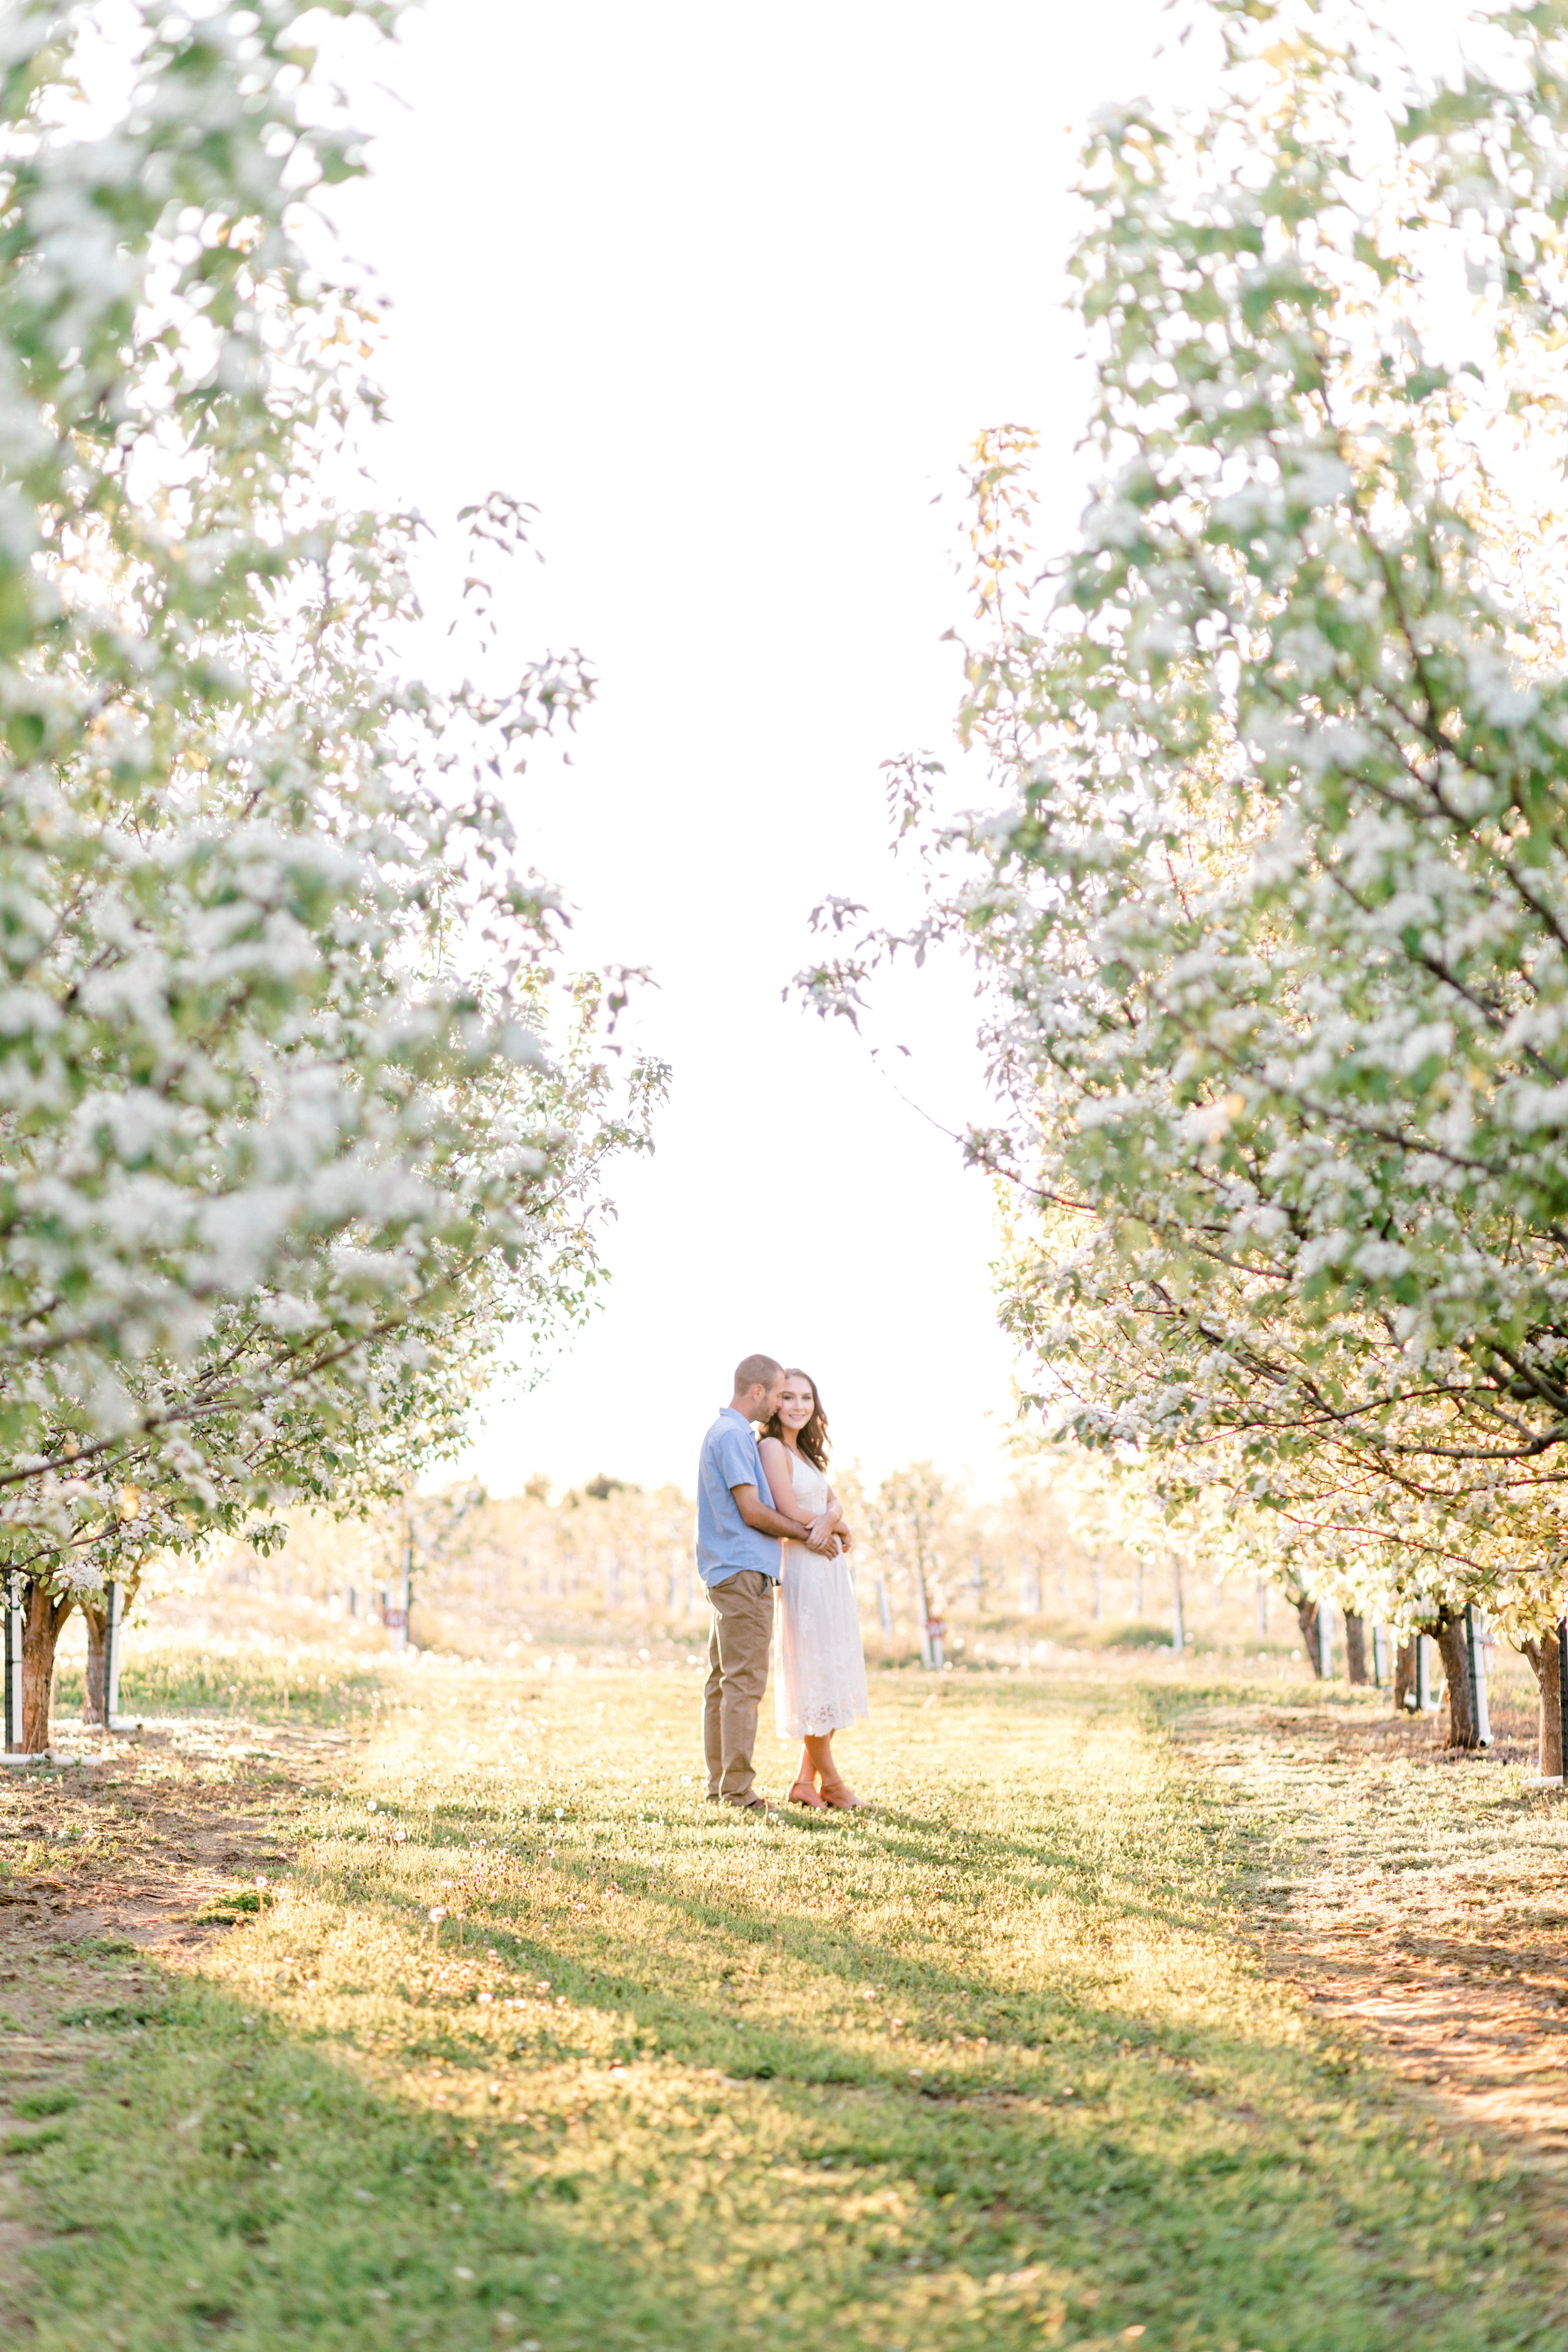 Sweet, outdoor engagement pictures should be romantic and fun! This golden glow session was jus that. Sunrise orchard engagement photo ideas with flower blossoms.